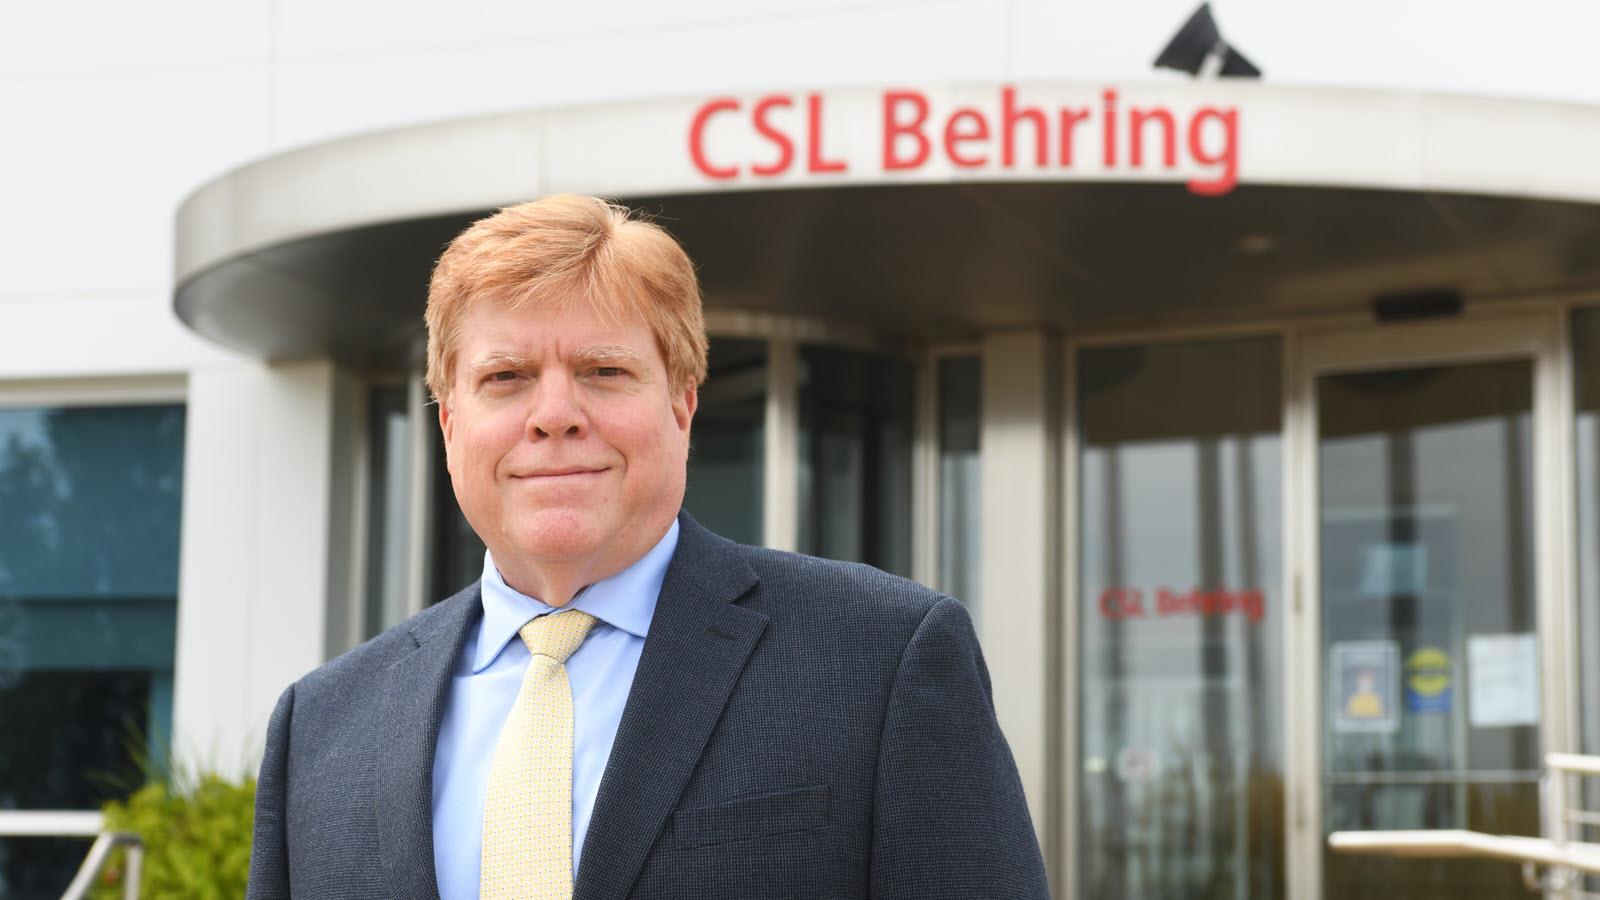 CSL Behring Kankakee GM Jose Gonzales outside the building - credit Kankakee Daily Journal 